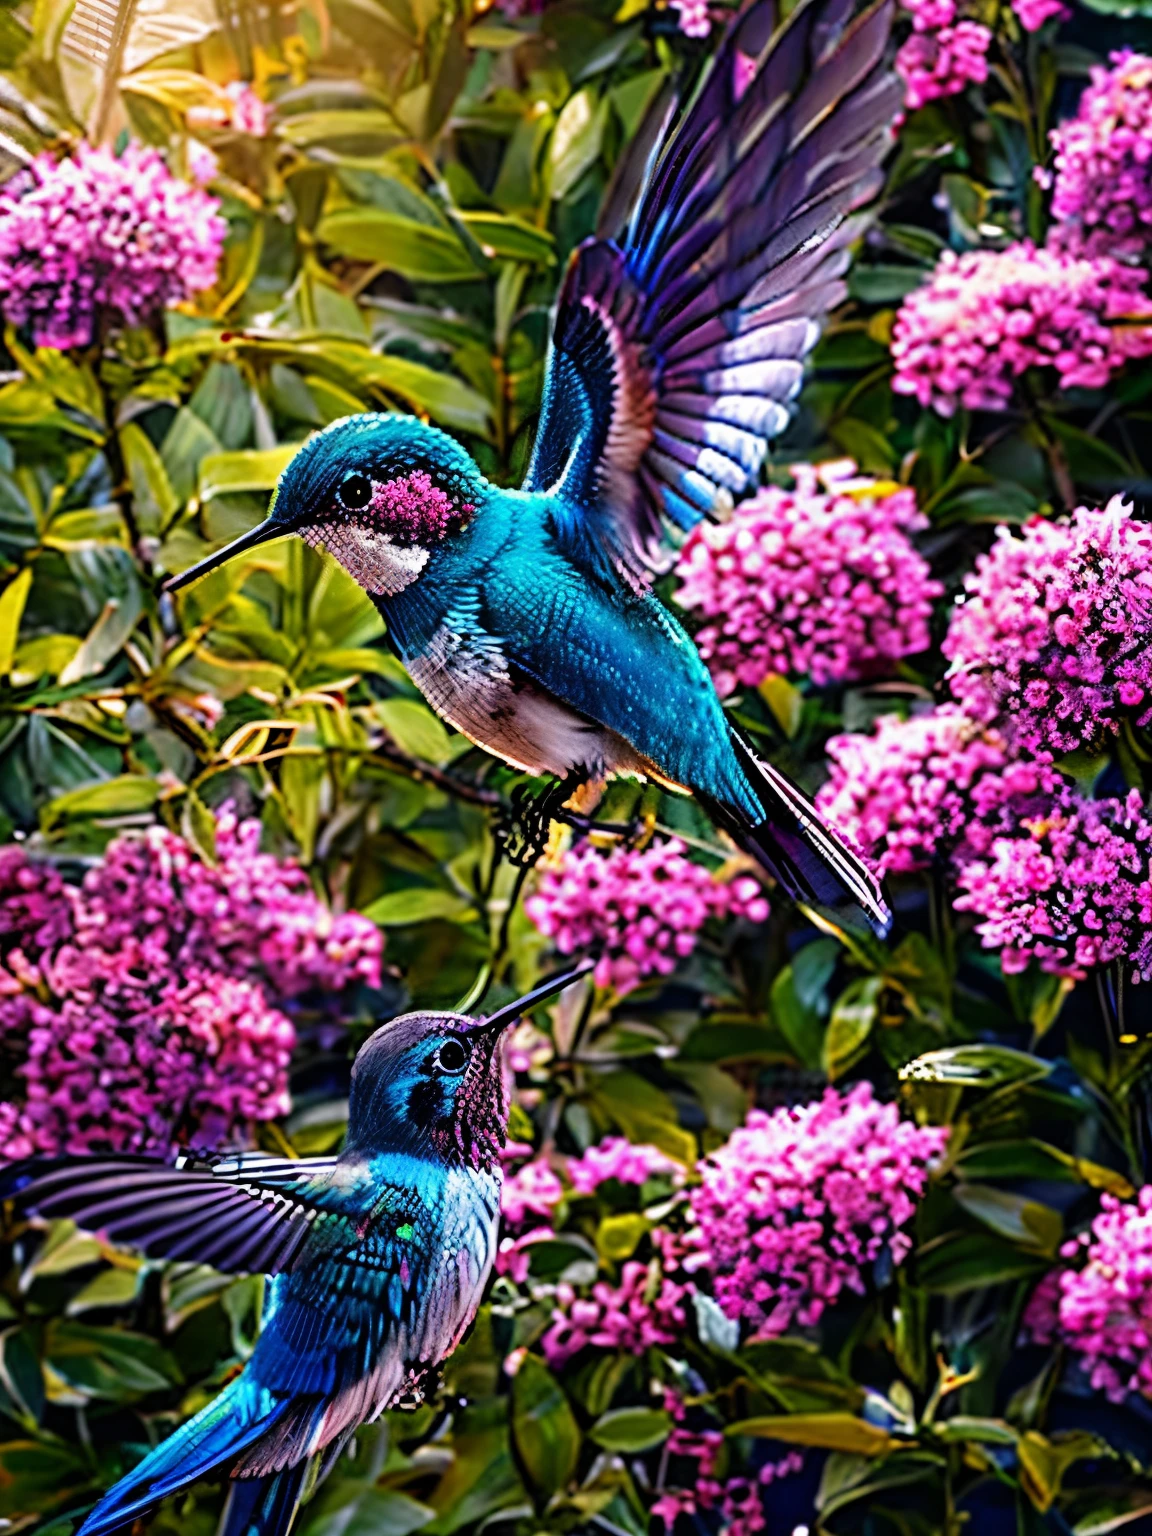 A blue bird flies near pink flowers, digital rendering, hummingbird, beautiful nature, Living nature, painting of a hummingbird, really beautiful nature, nature photos, nice images, !!natural beauty!!, incredibly beautiful, Stunning visual effects, Insects and birds, very beautiful photos, 